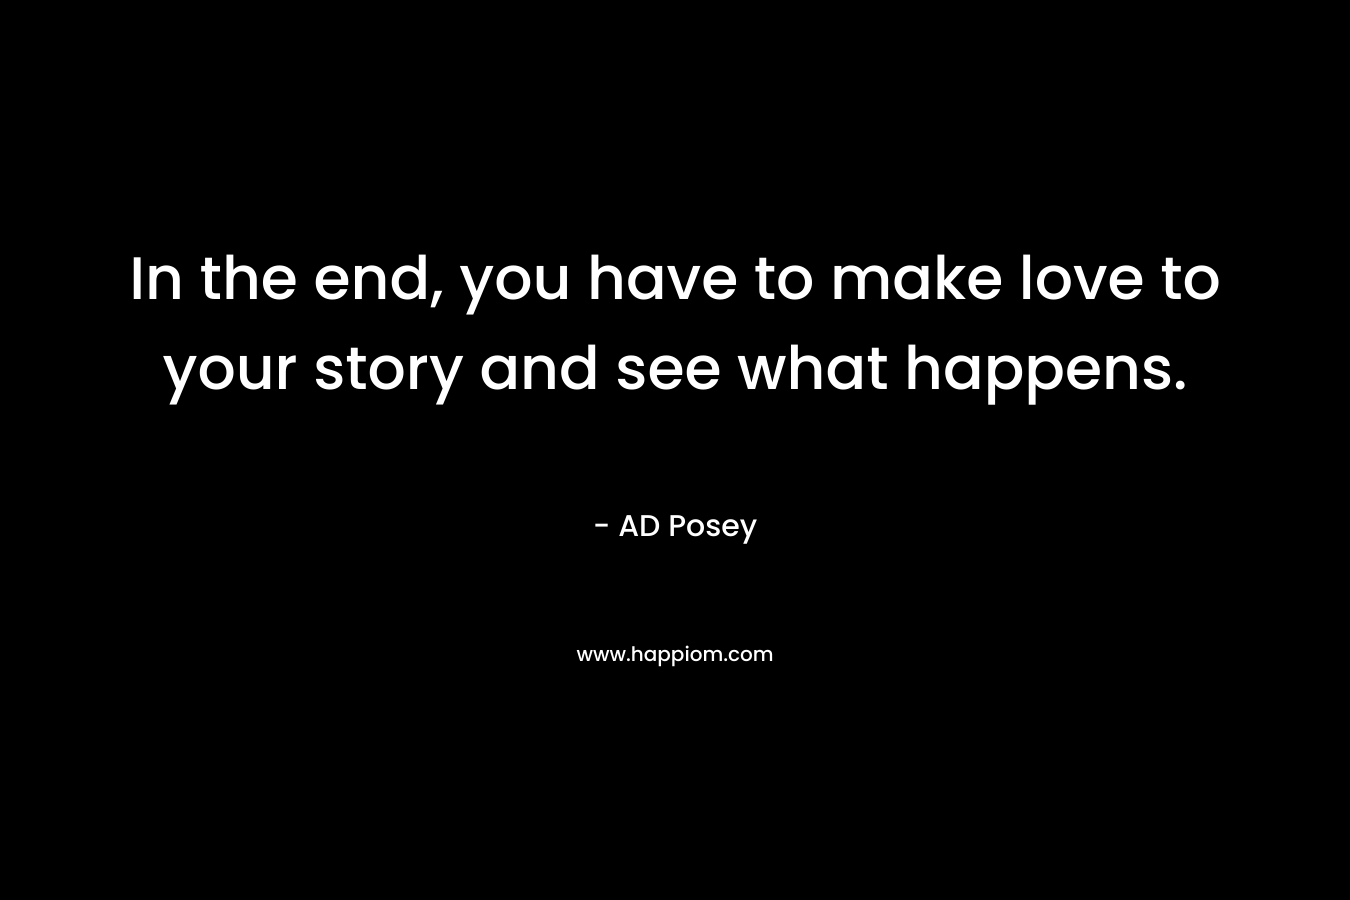 In the end, you have to make love to your story and see what happens. – AD Posey